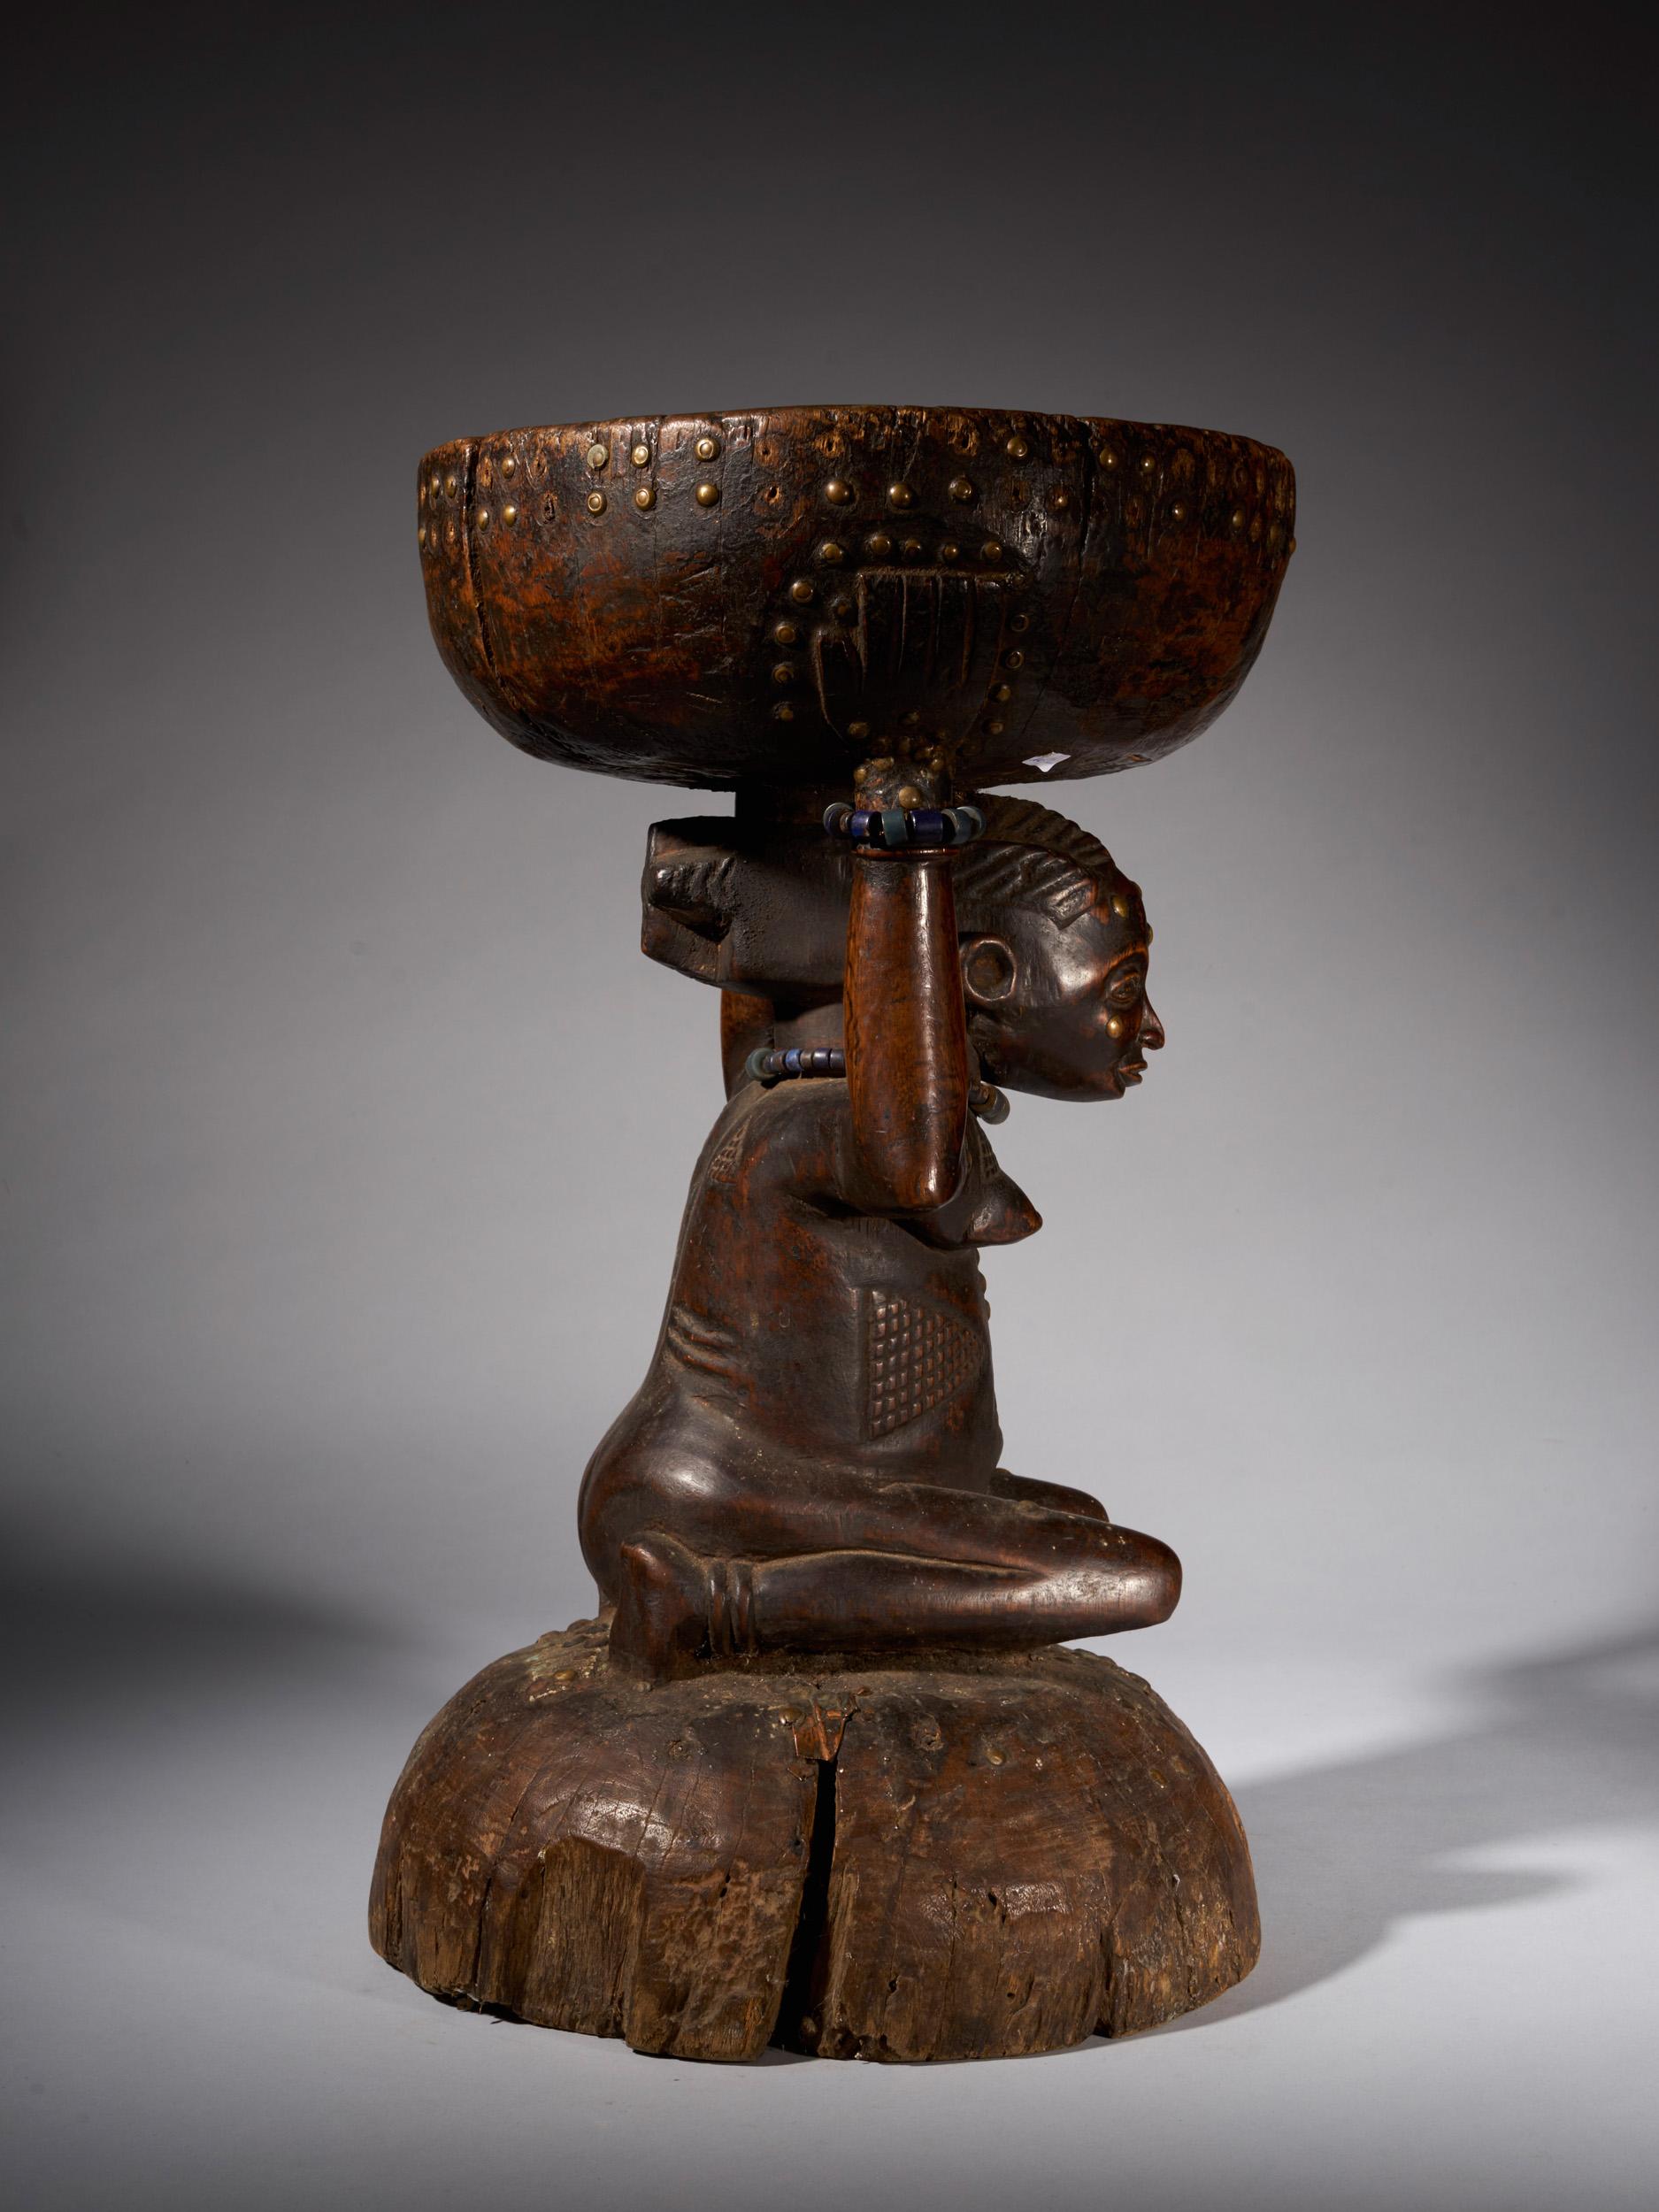 The stool represented here is a typical Caryatide stool of the Zela people in the Democratic Republic of Congo. The stool is carved out of wood and is held up by a kneeling woman covered with typical Zela scarifications, showing her high ranking